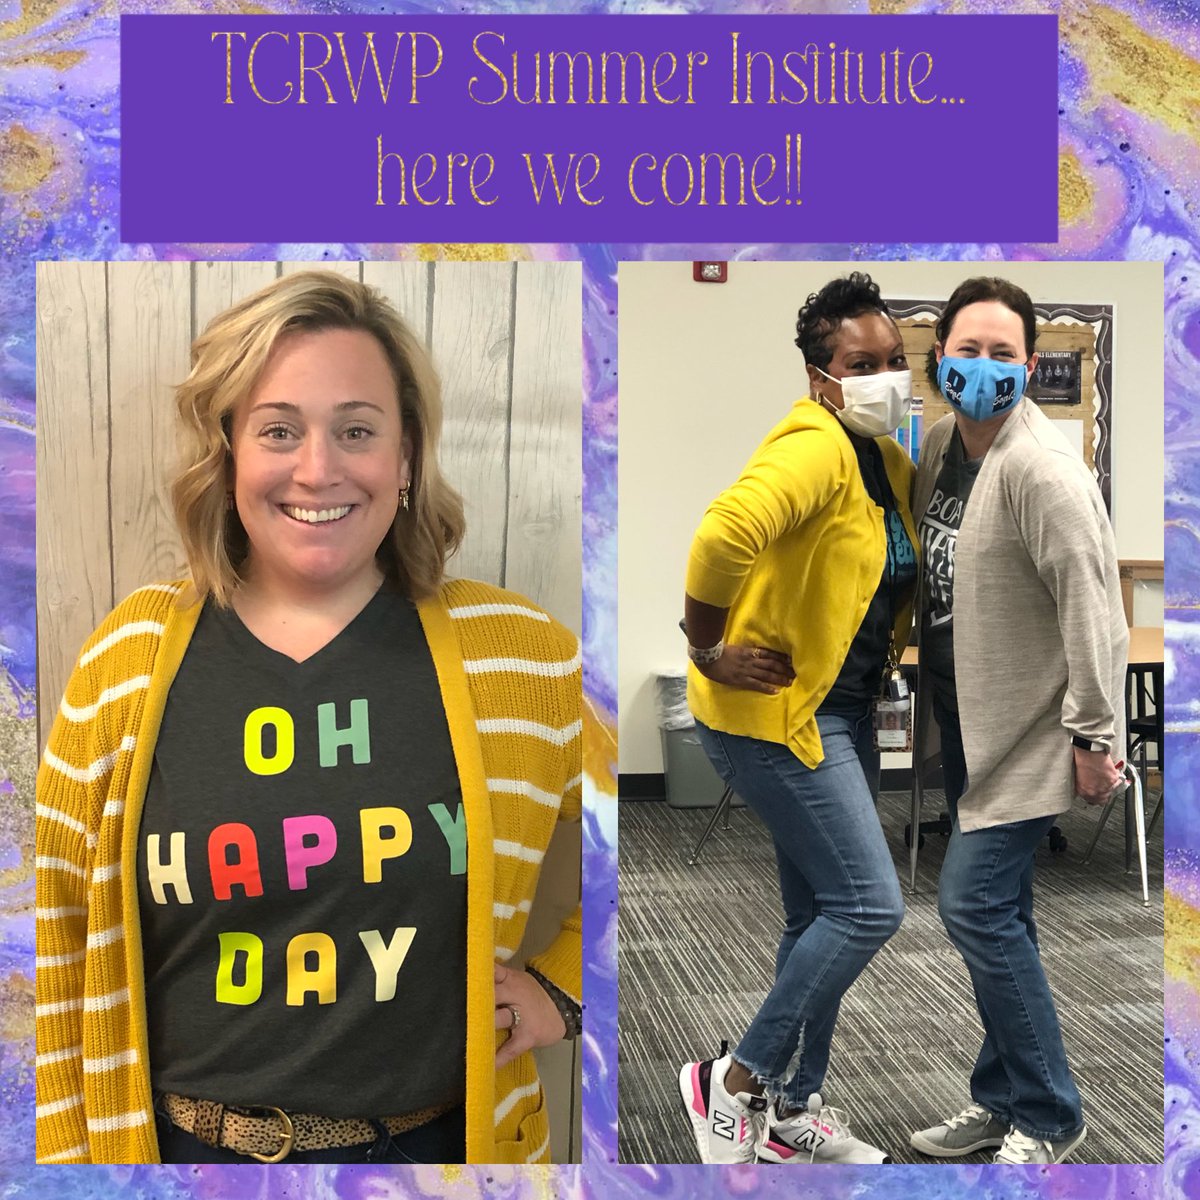 Oh happy day is right! These 3 fabulous teachers are ready for some summer learning! @Boals_Frisco @ci_elem #FISDliteracy #TCRWP